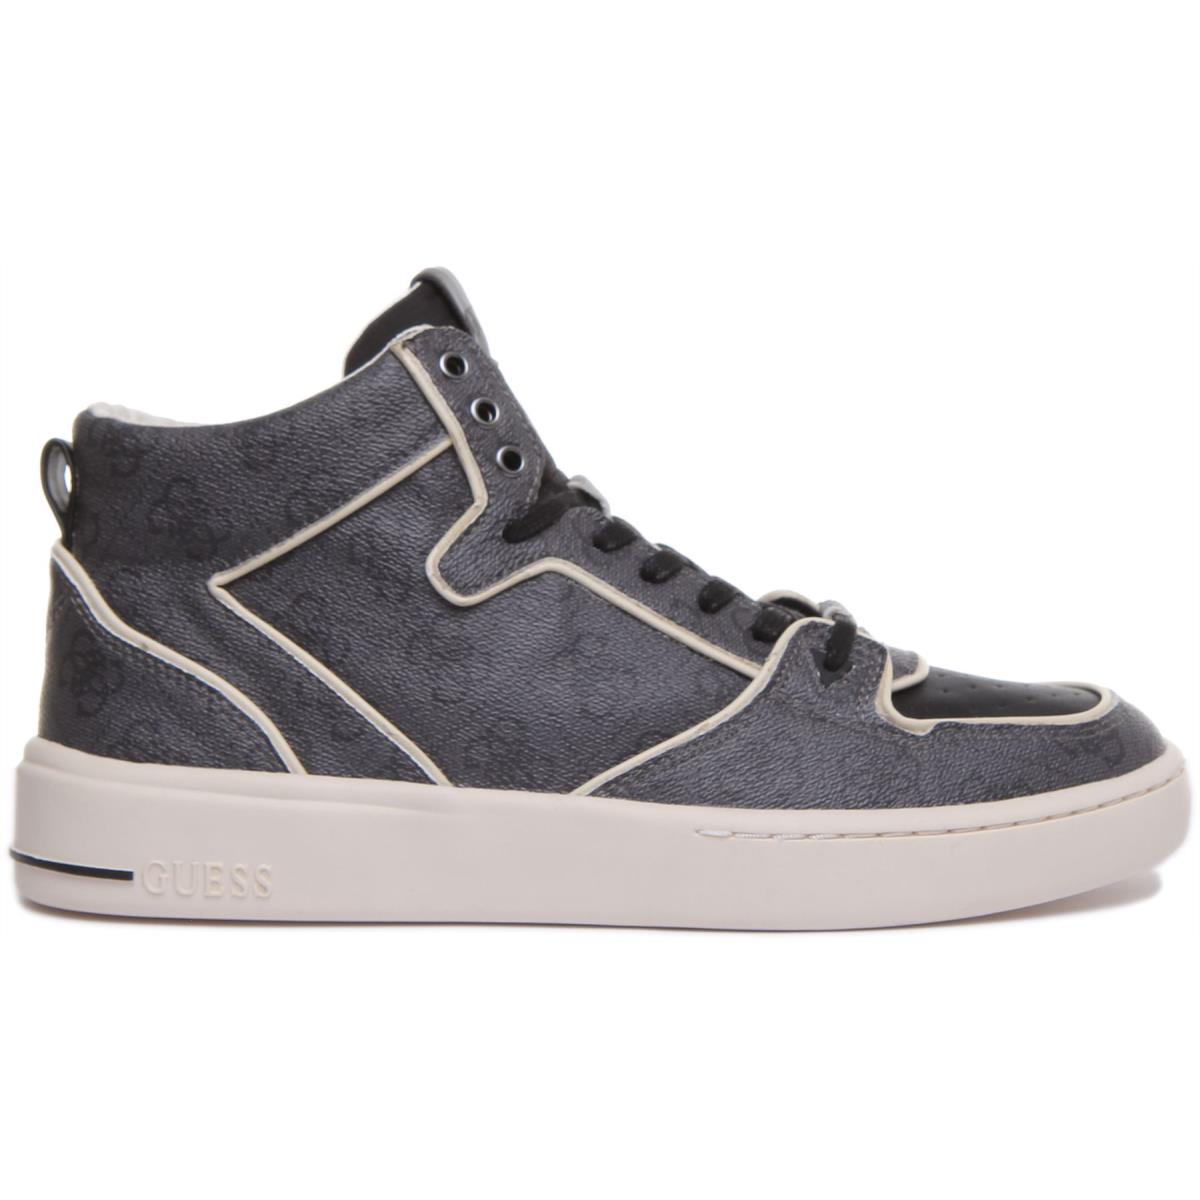 Guess Fm5Vemfal12 Coal Verona Mid Sport Lace Up High Top Trainer Size US 7 - 13